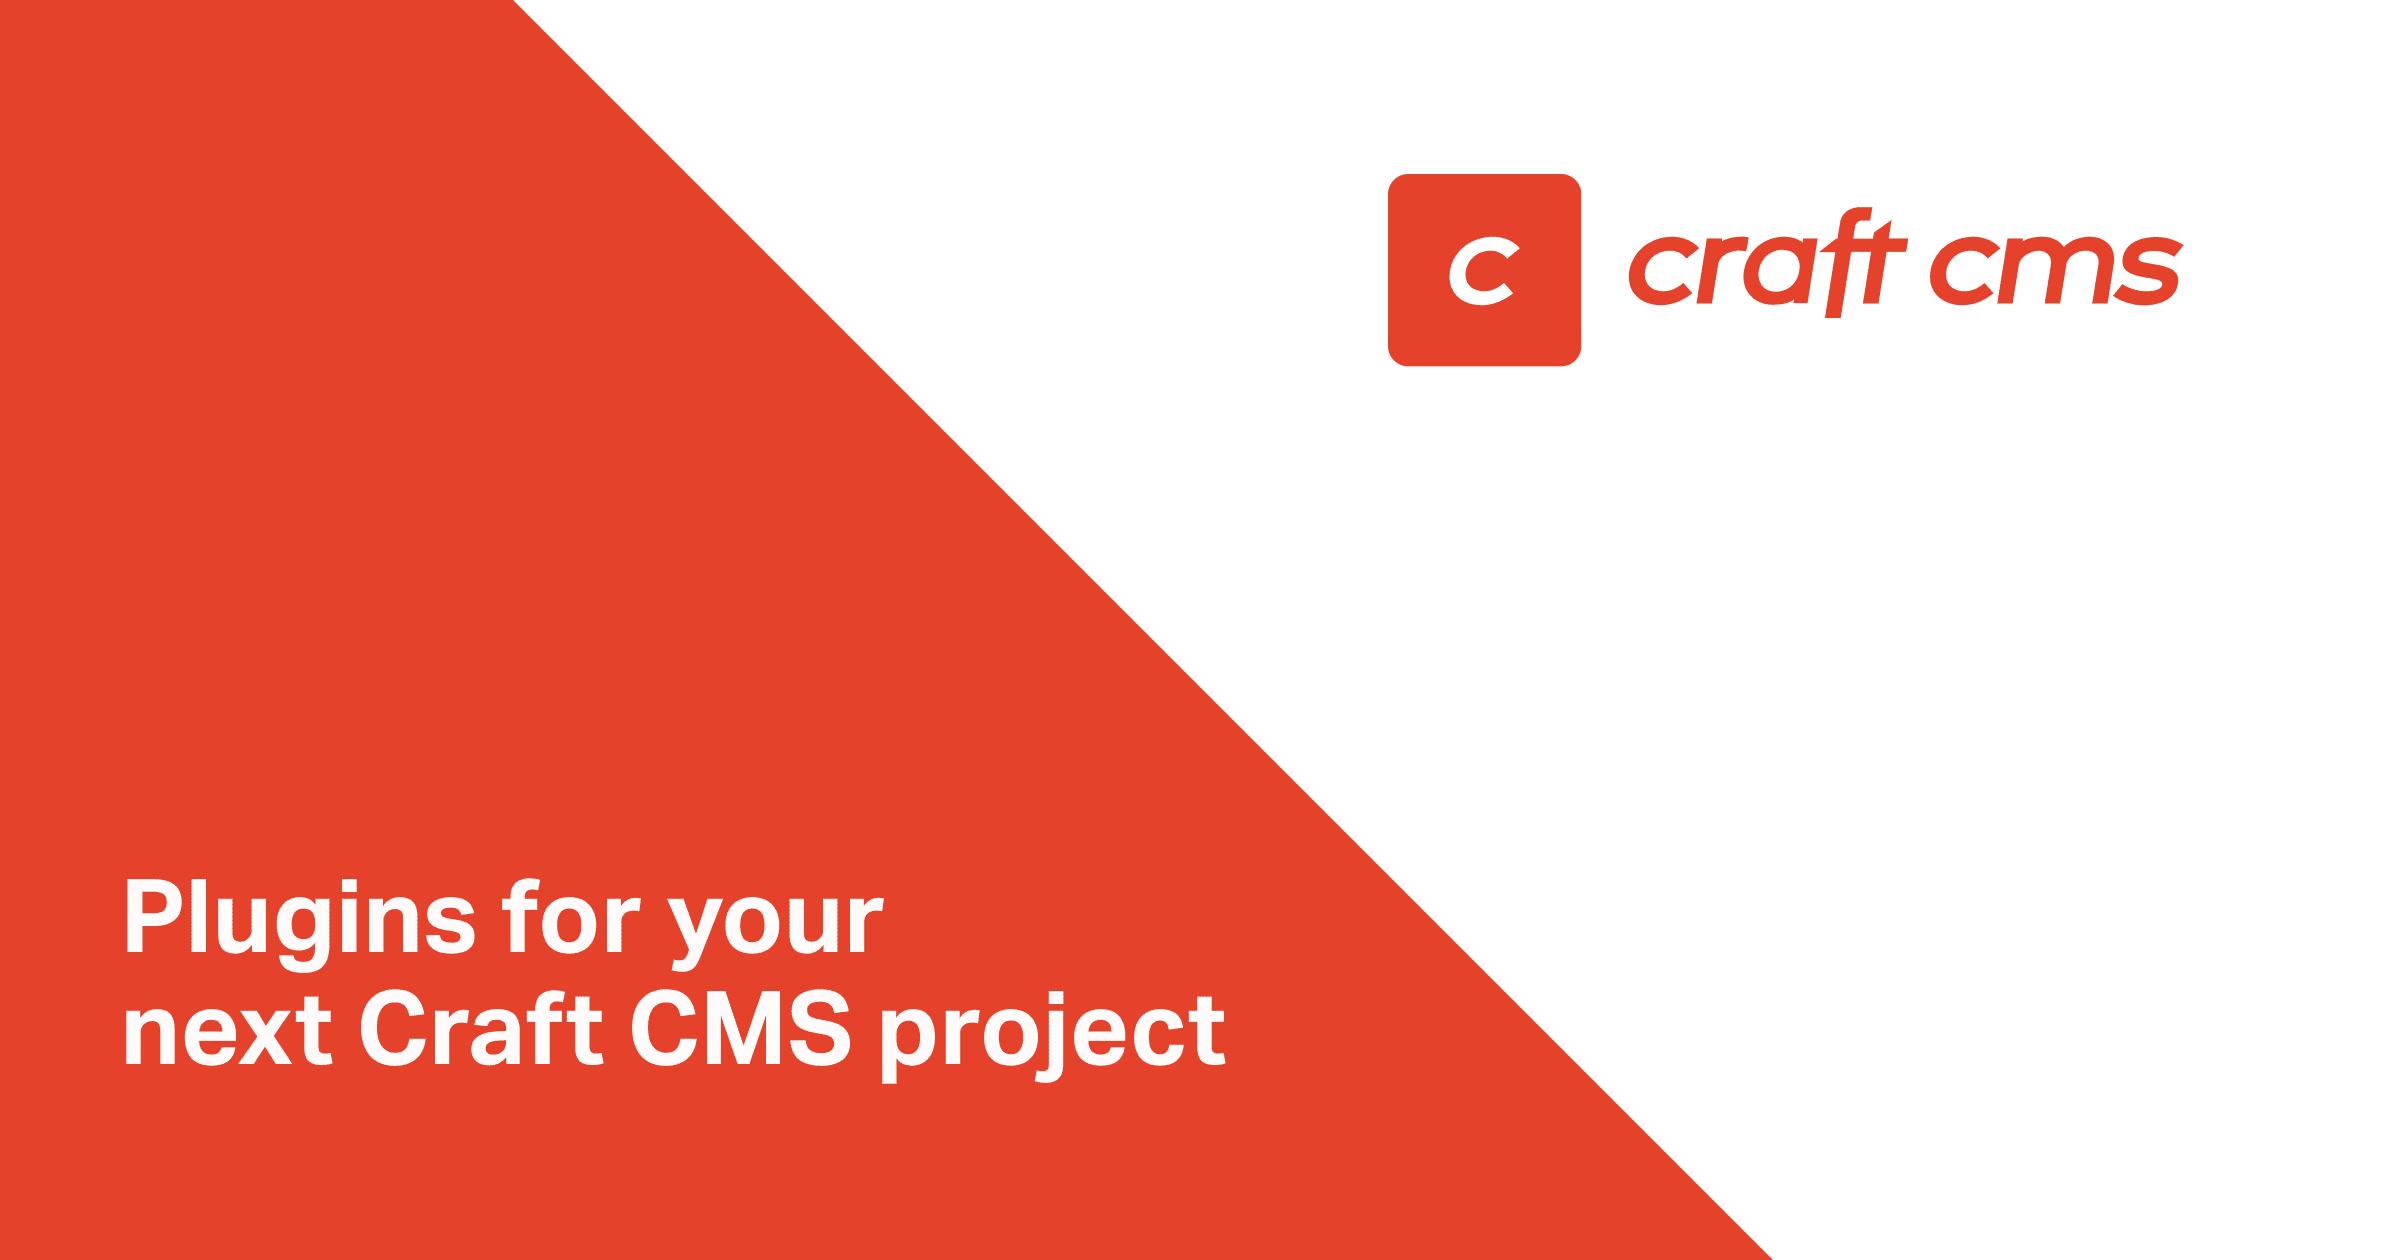 Plugins for your next Craft CMS project